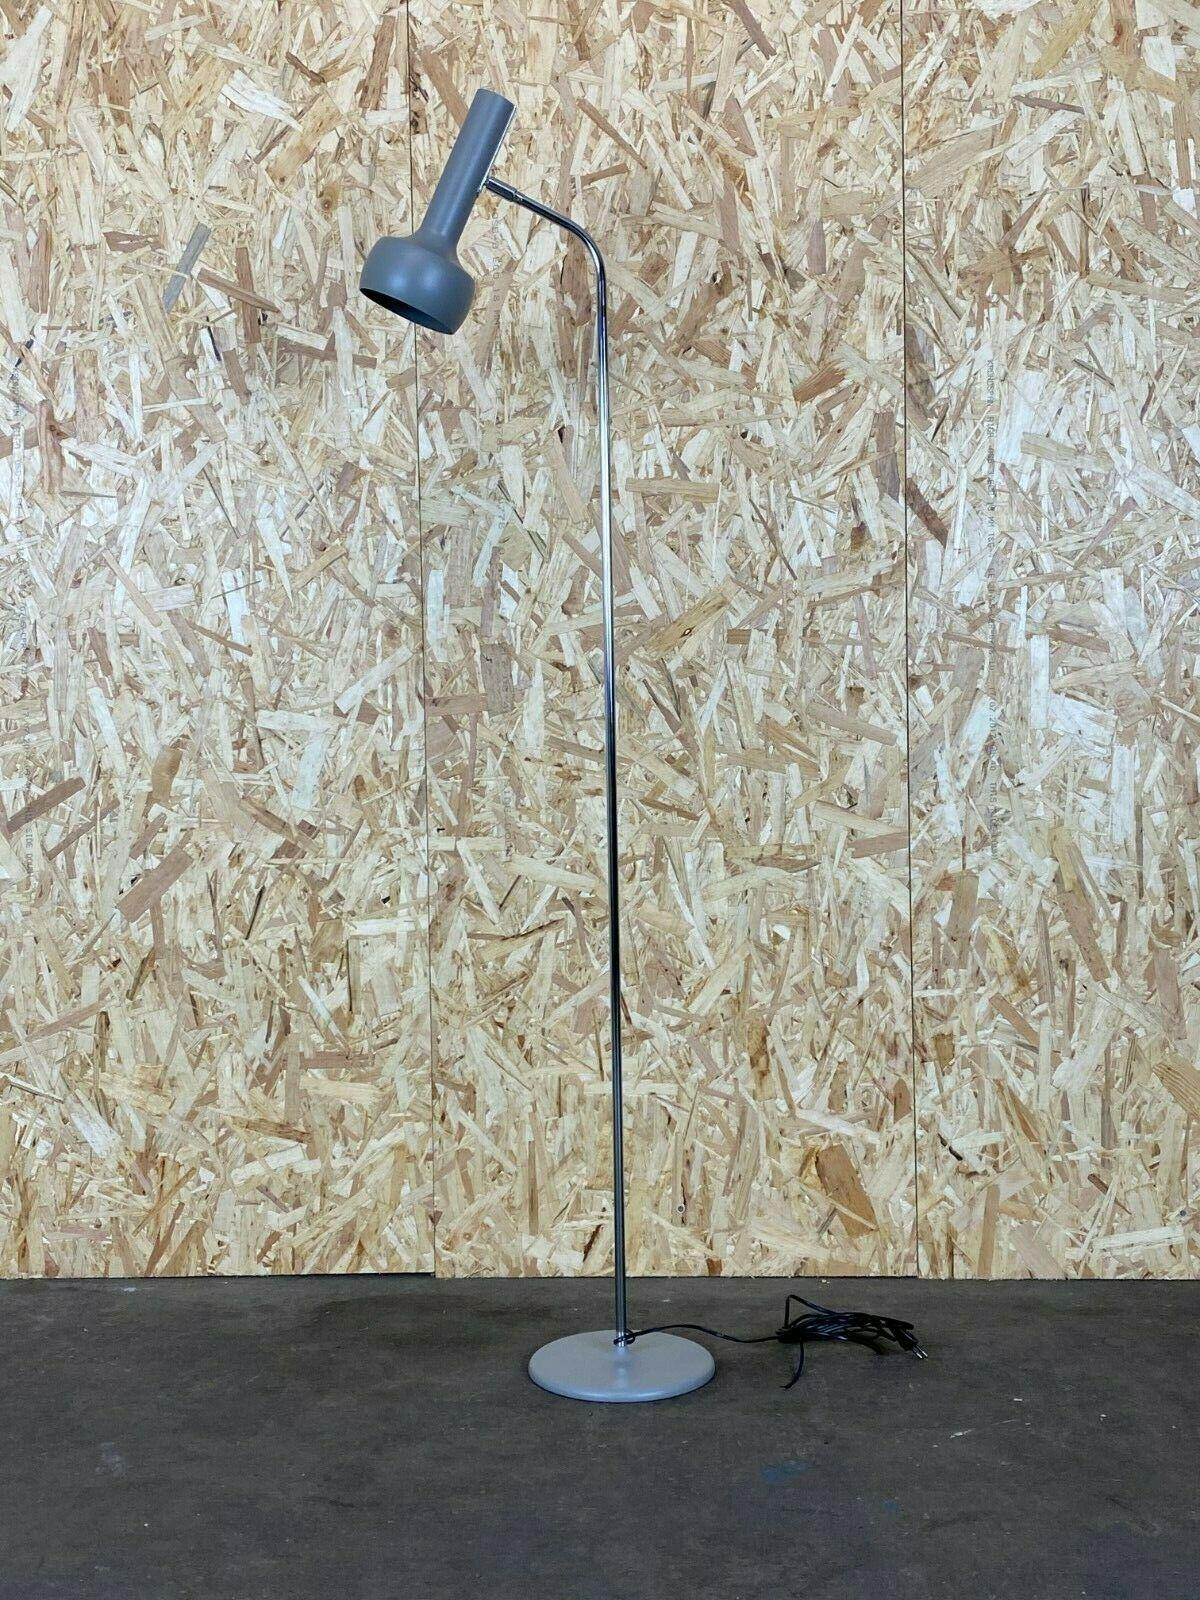 60s 70s Swisslamps lamp light floor lamp metal space age

Object: floor lamp

Manufacturer: Swisslamp

Condition: good

Age: around 1960-1970

Dimensions:

Height = 141cm

Other notes:

The pictures serve as part of the